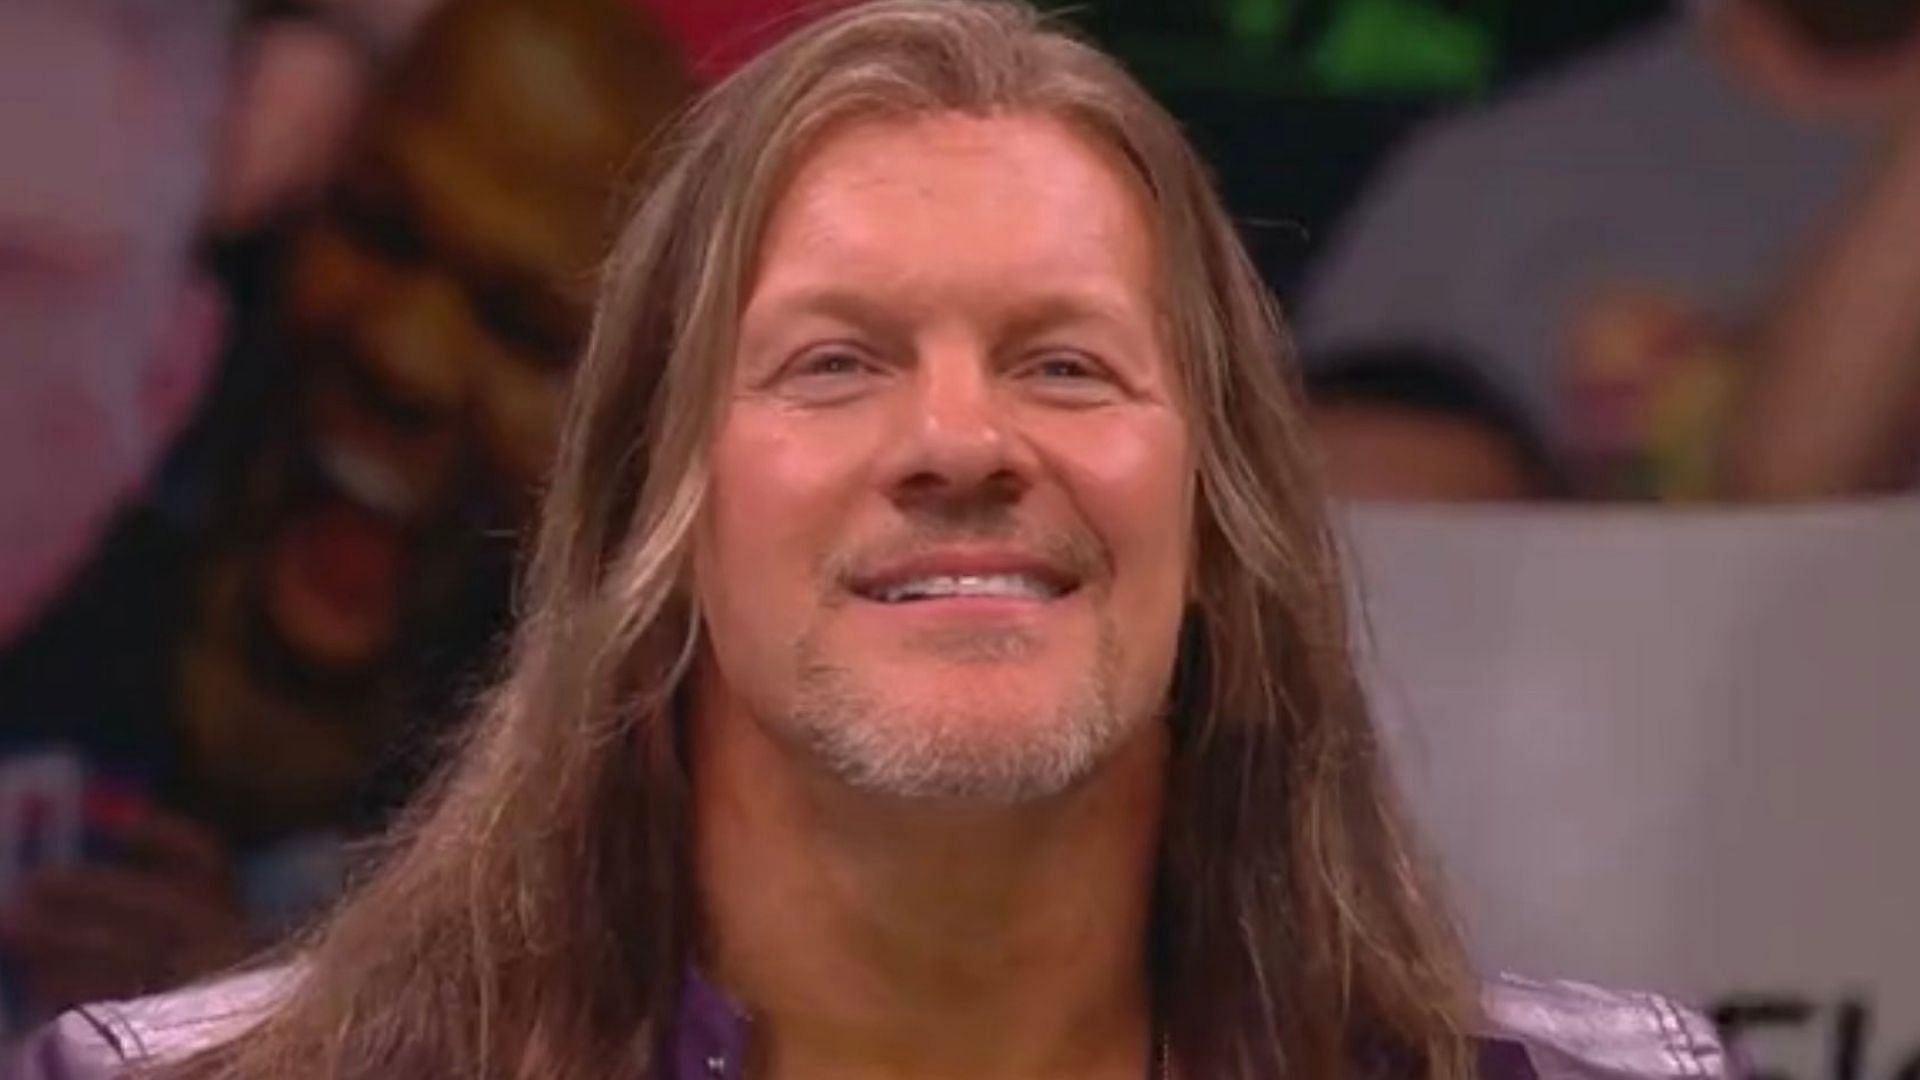 Chris Jericho made some major changes on AEW Dynamite.